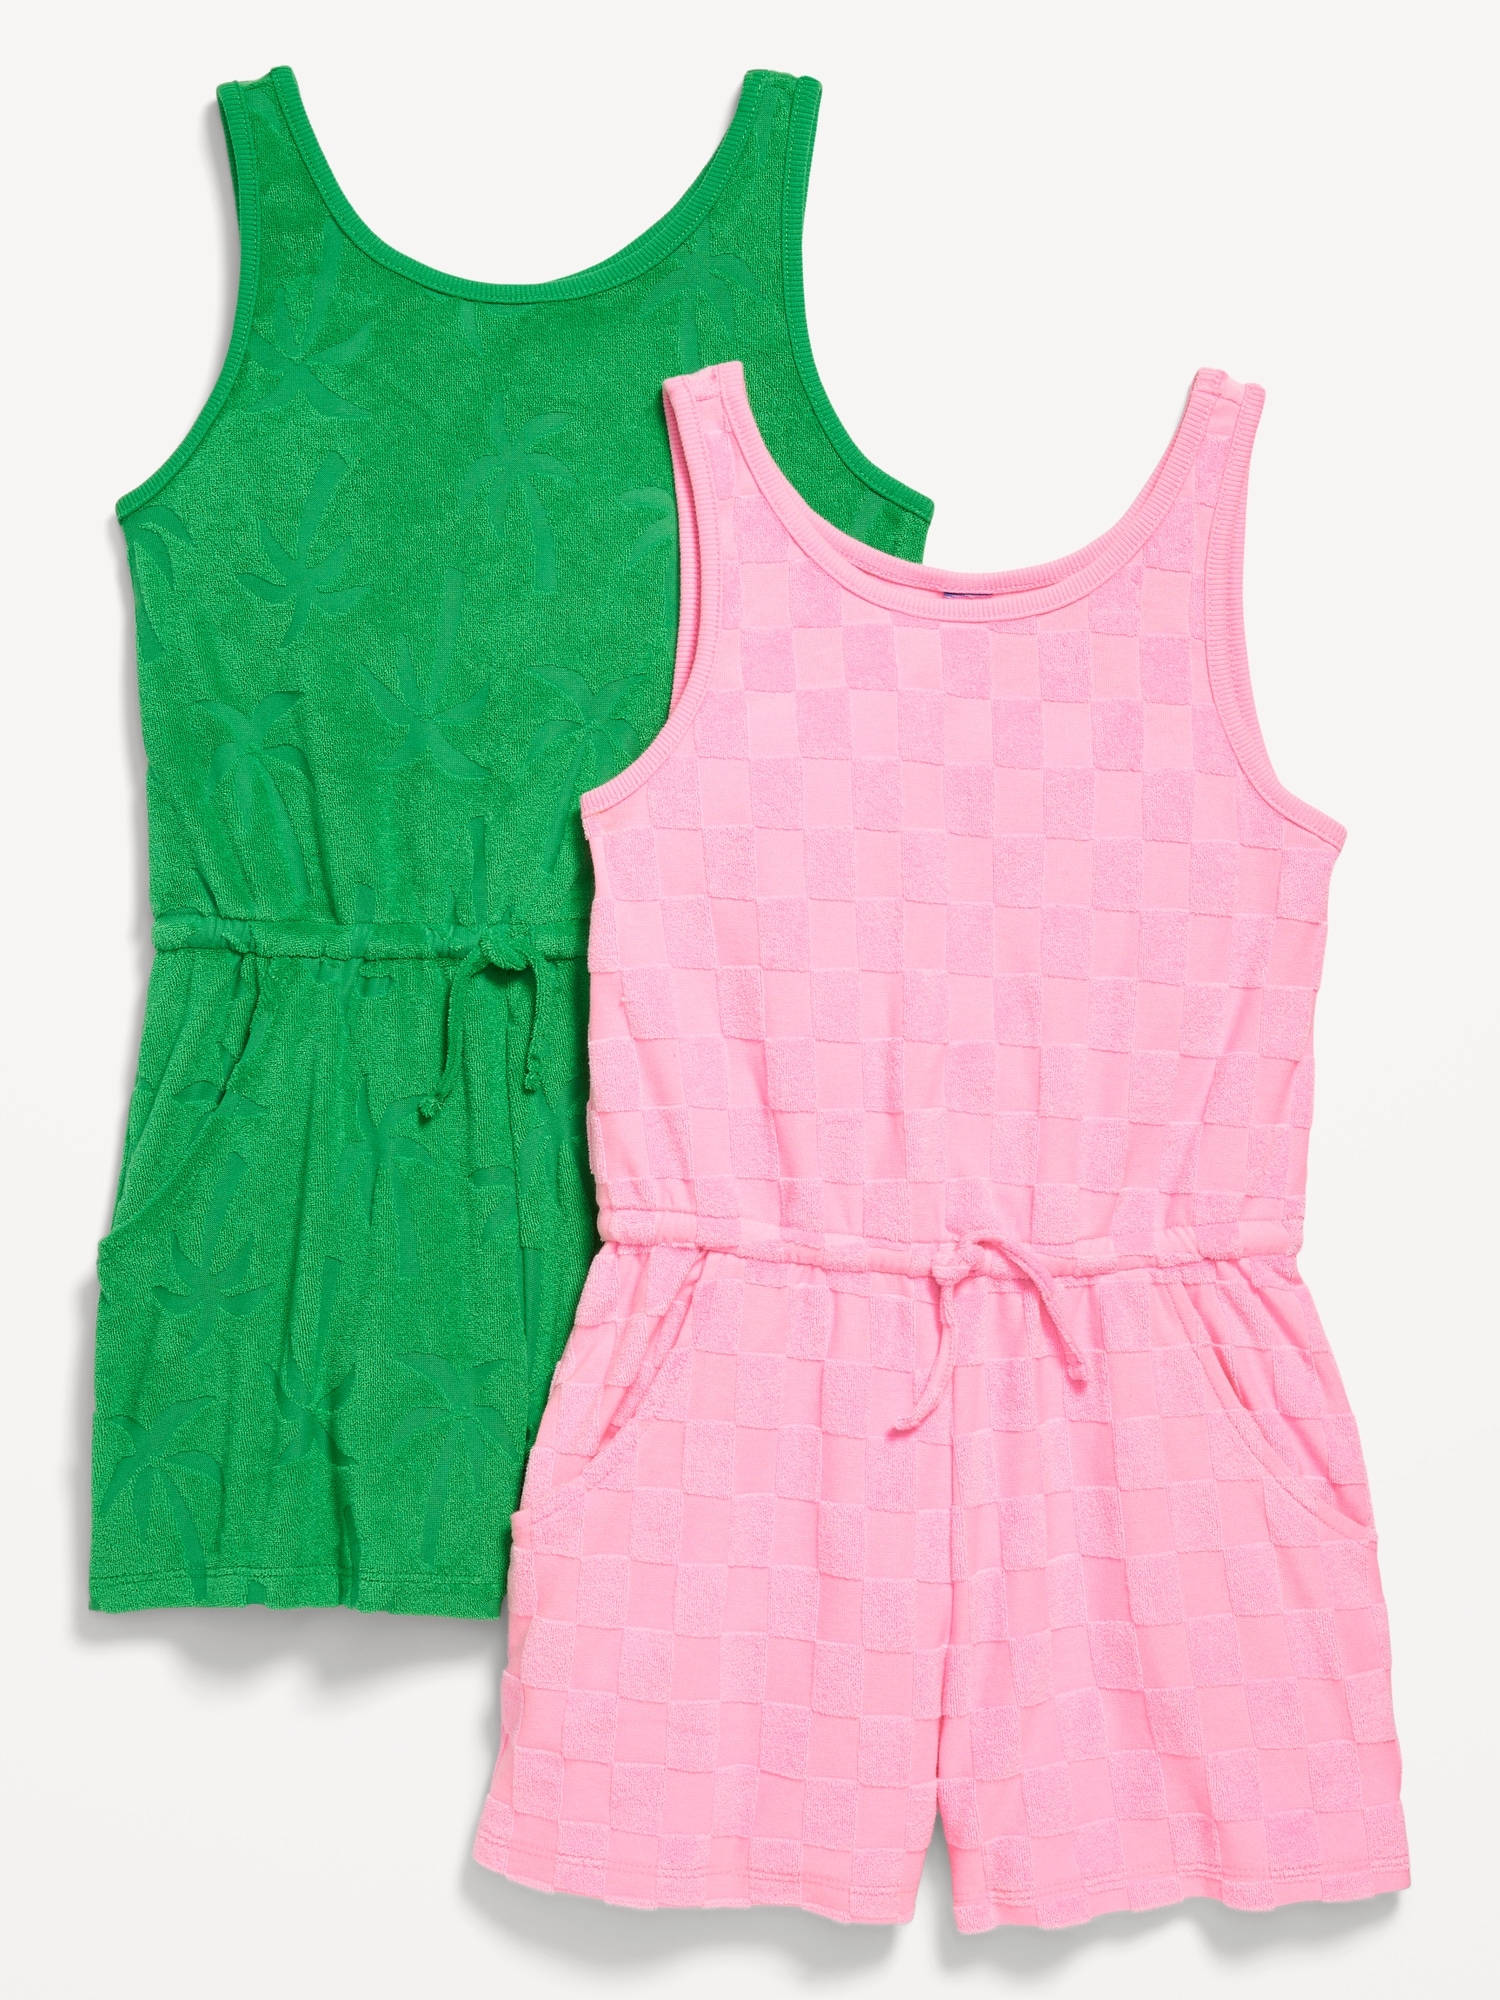 Sleeveless Terry Cinched-Waist Romper 2-Pack for Girls Hot Deal